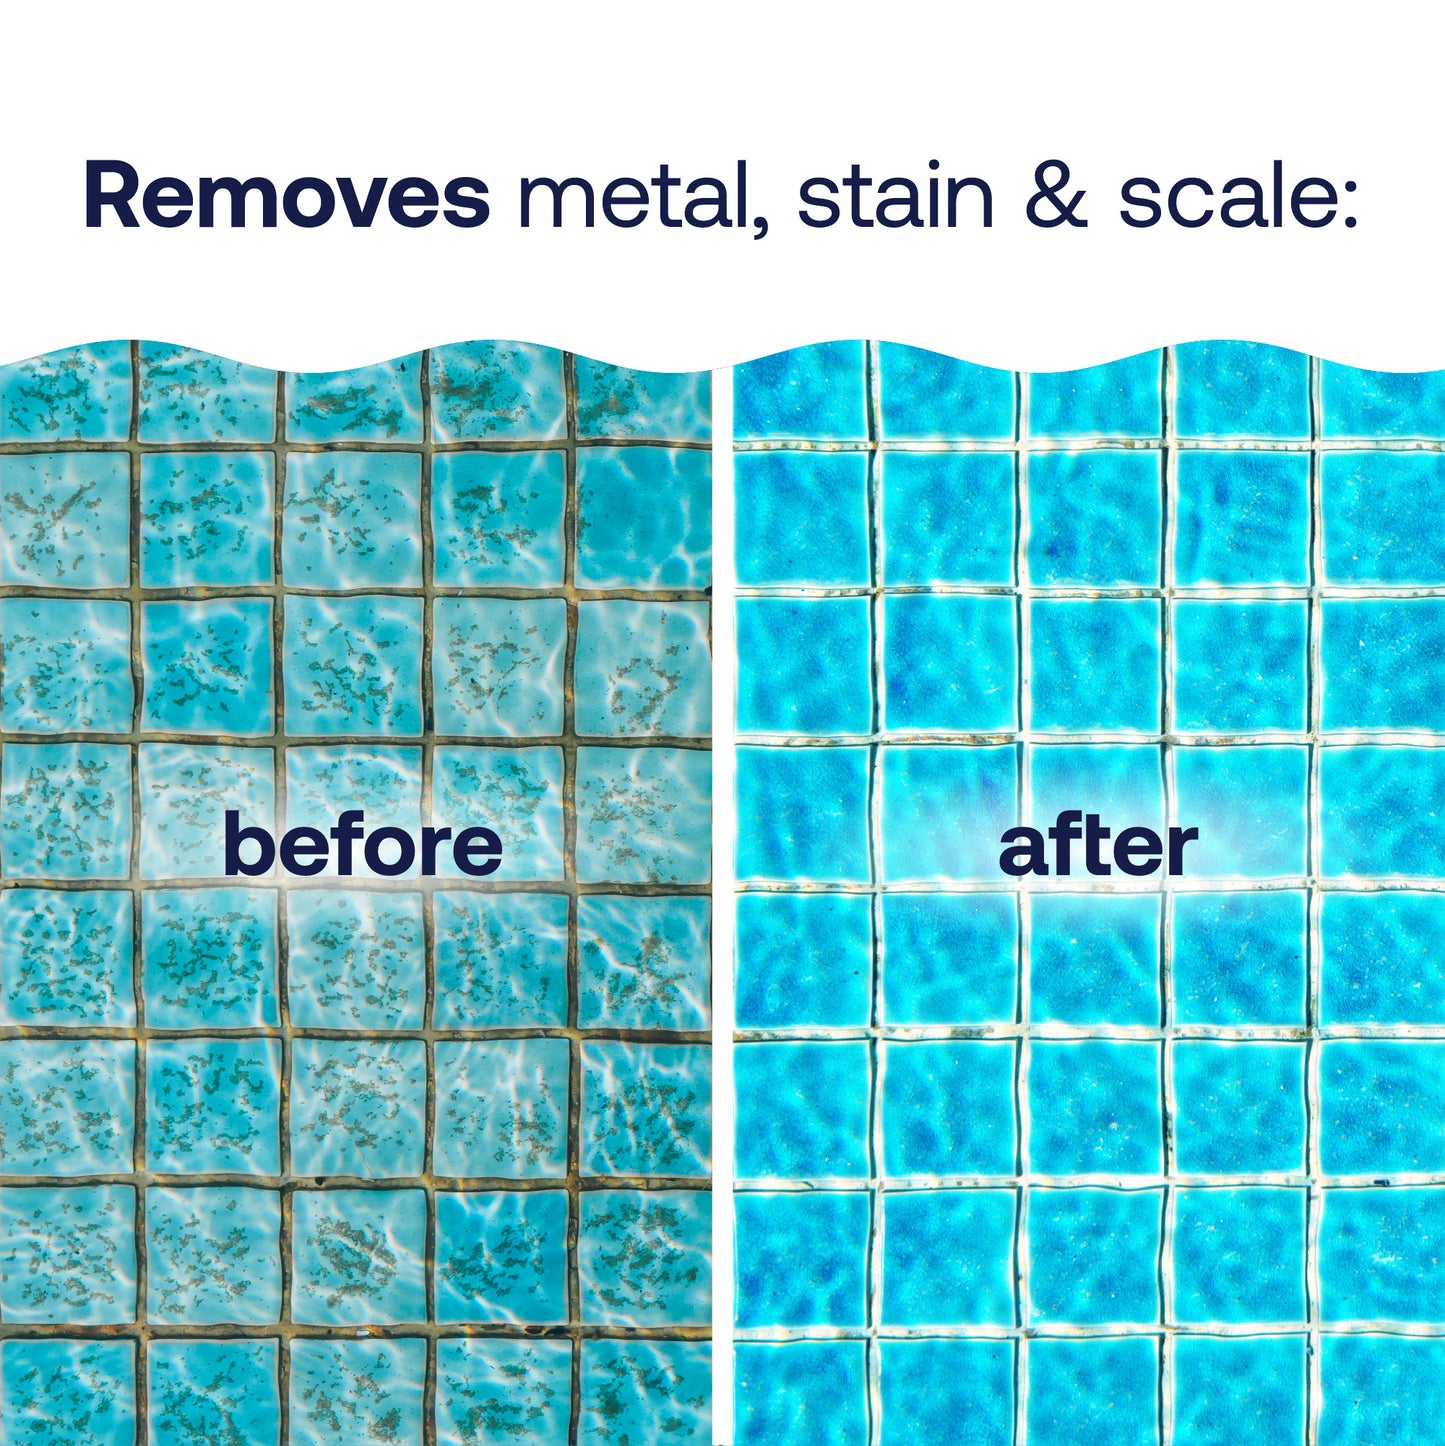 HTH® Pool Care Metal, Stain & Scale Control